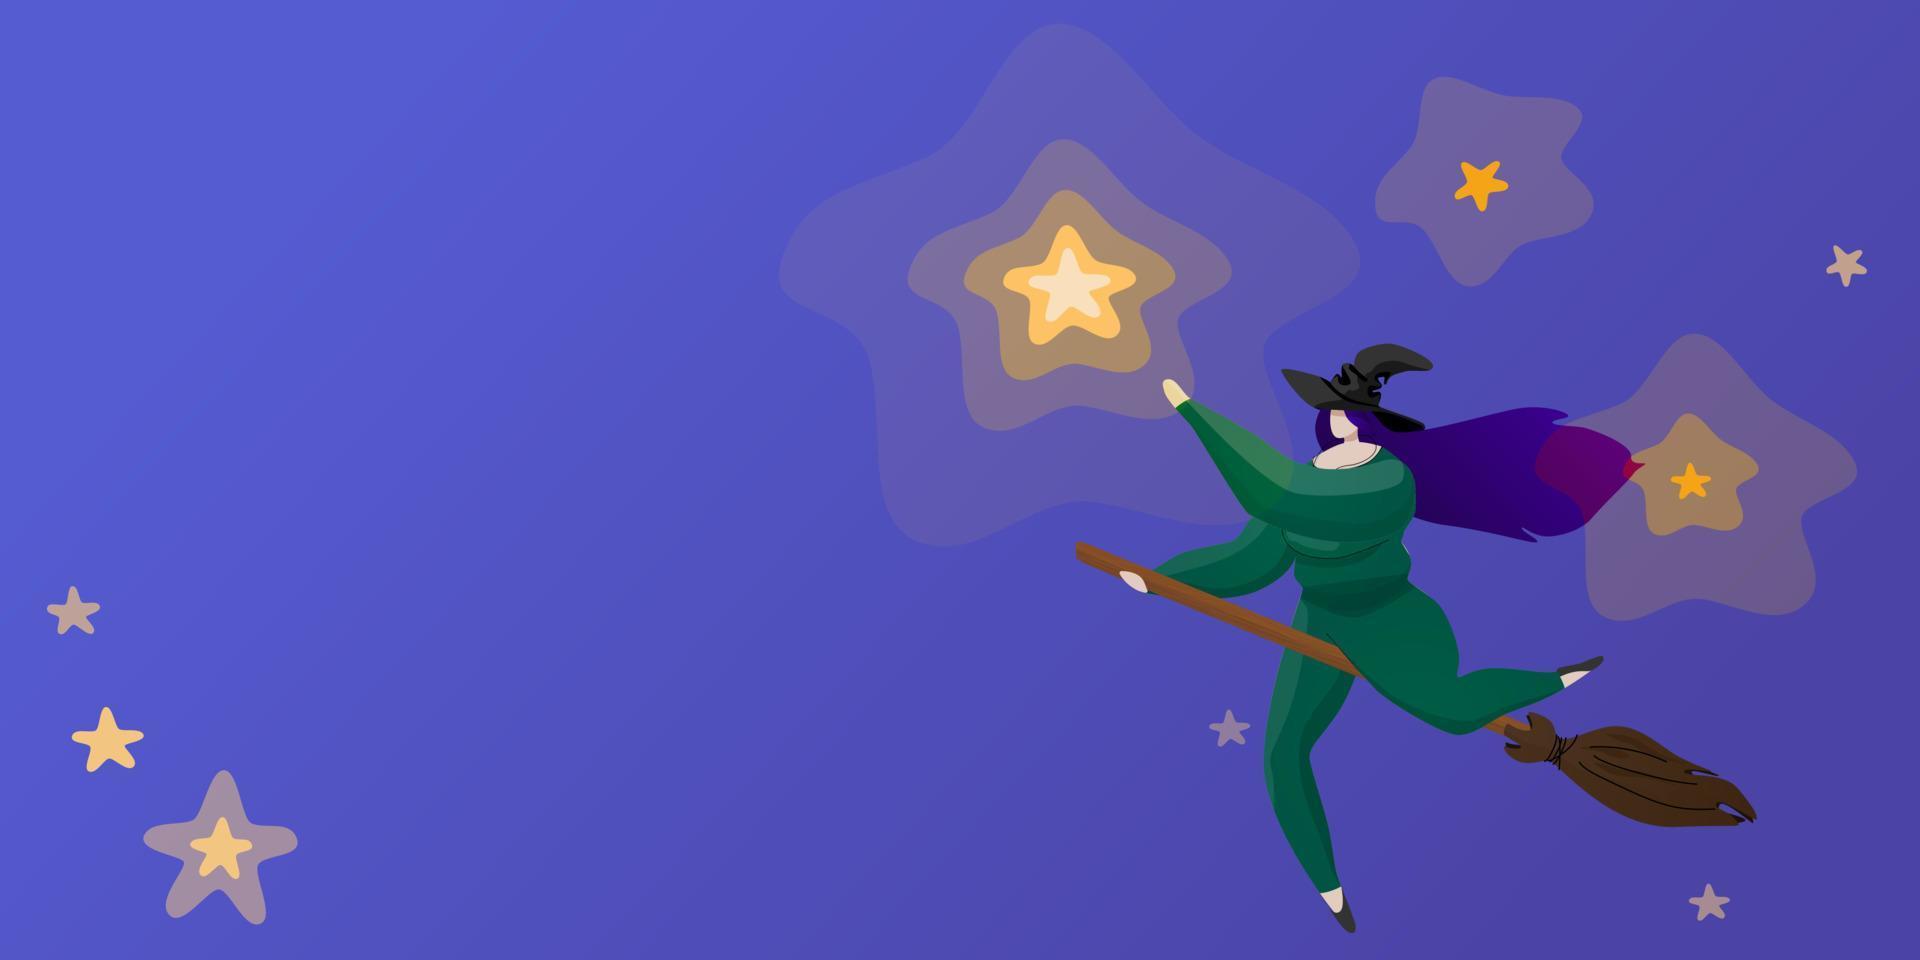 Witch in green costume and wizard hat is flying on the broom and reaches the star. Halloween banner design. Flat style vector illustration with faceless character.